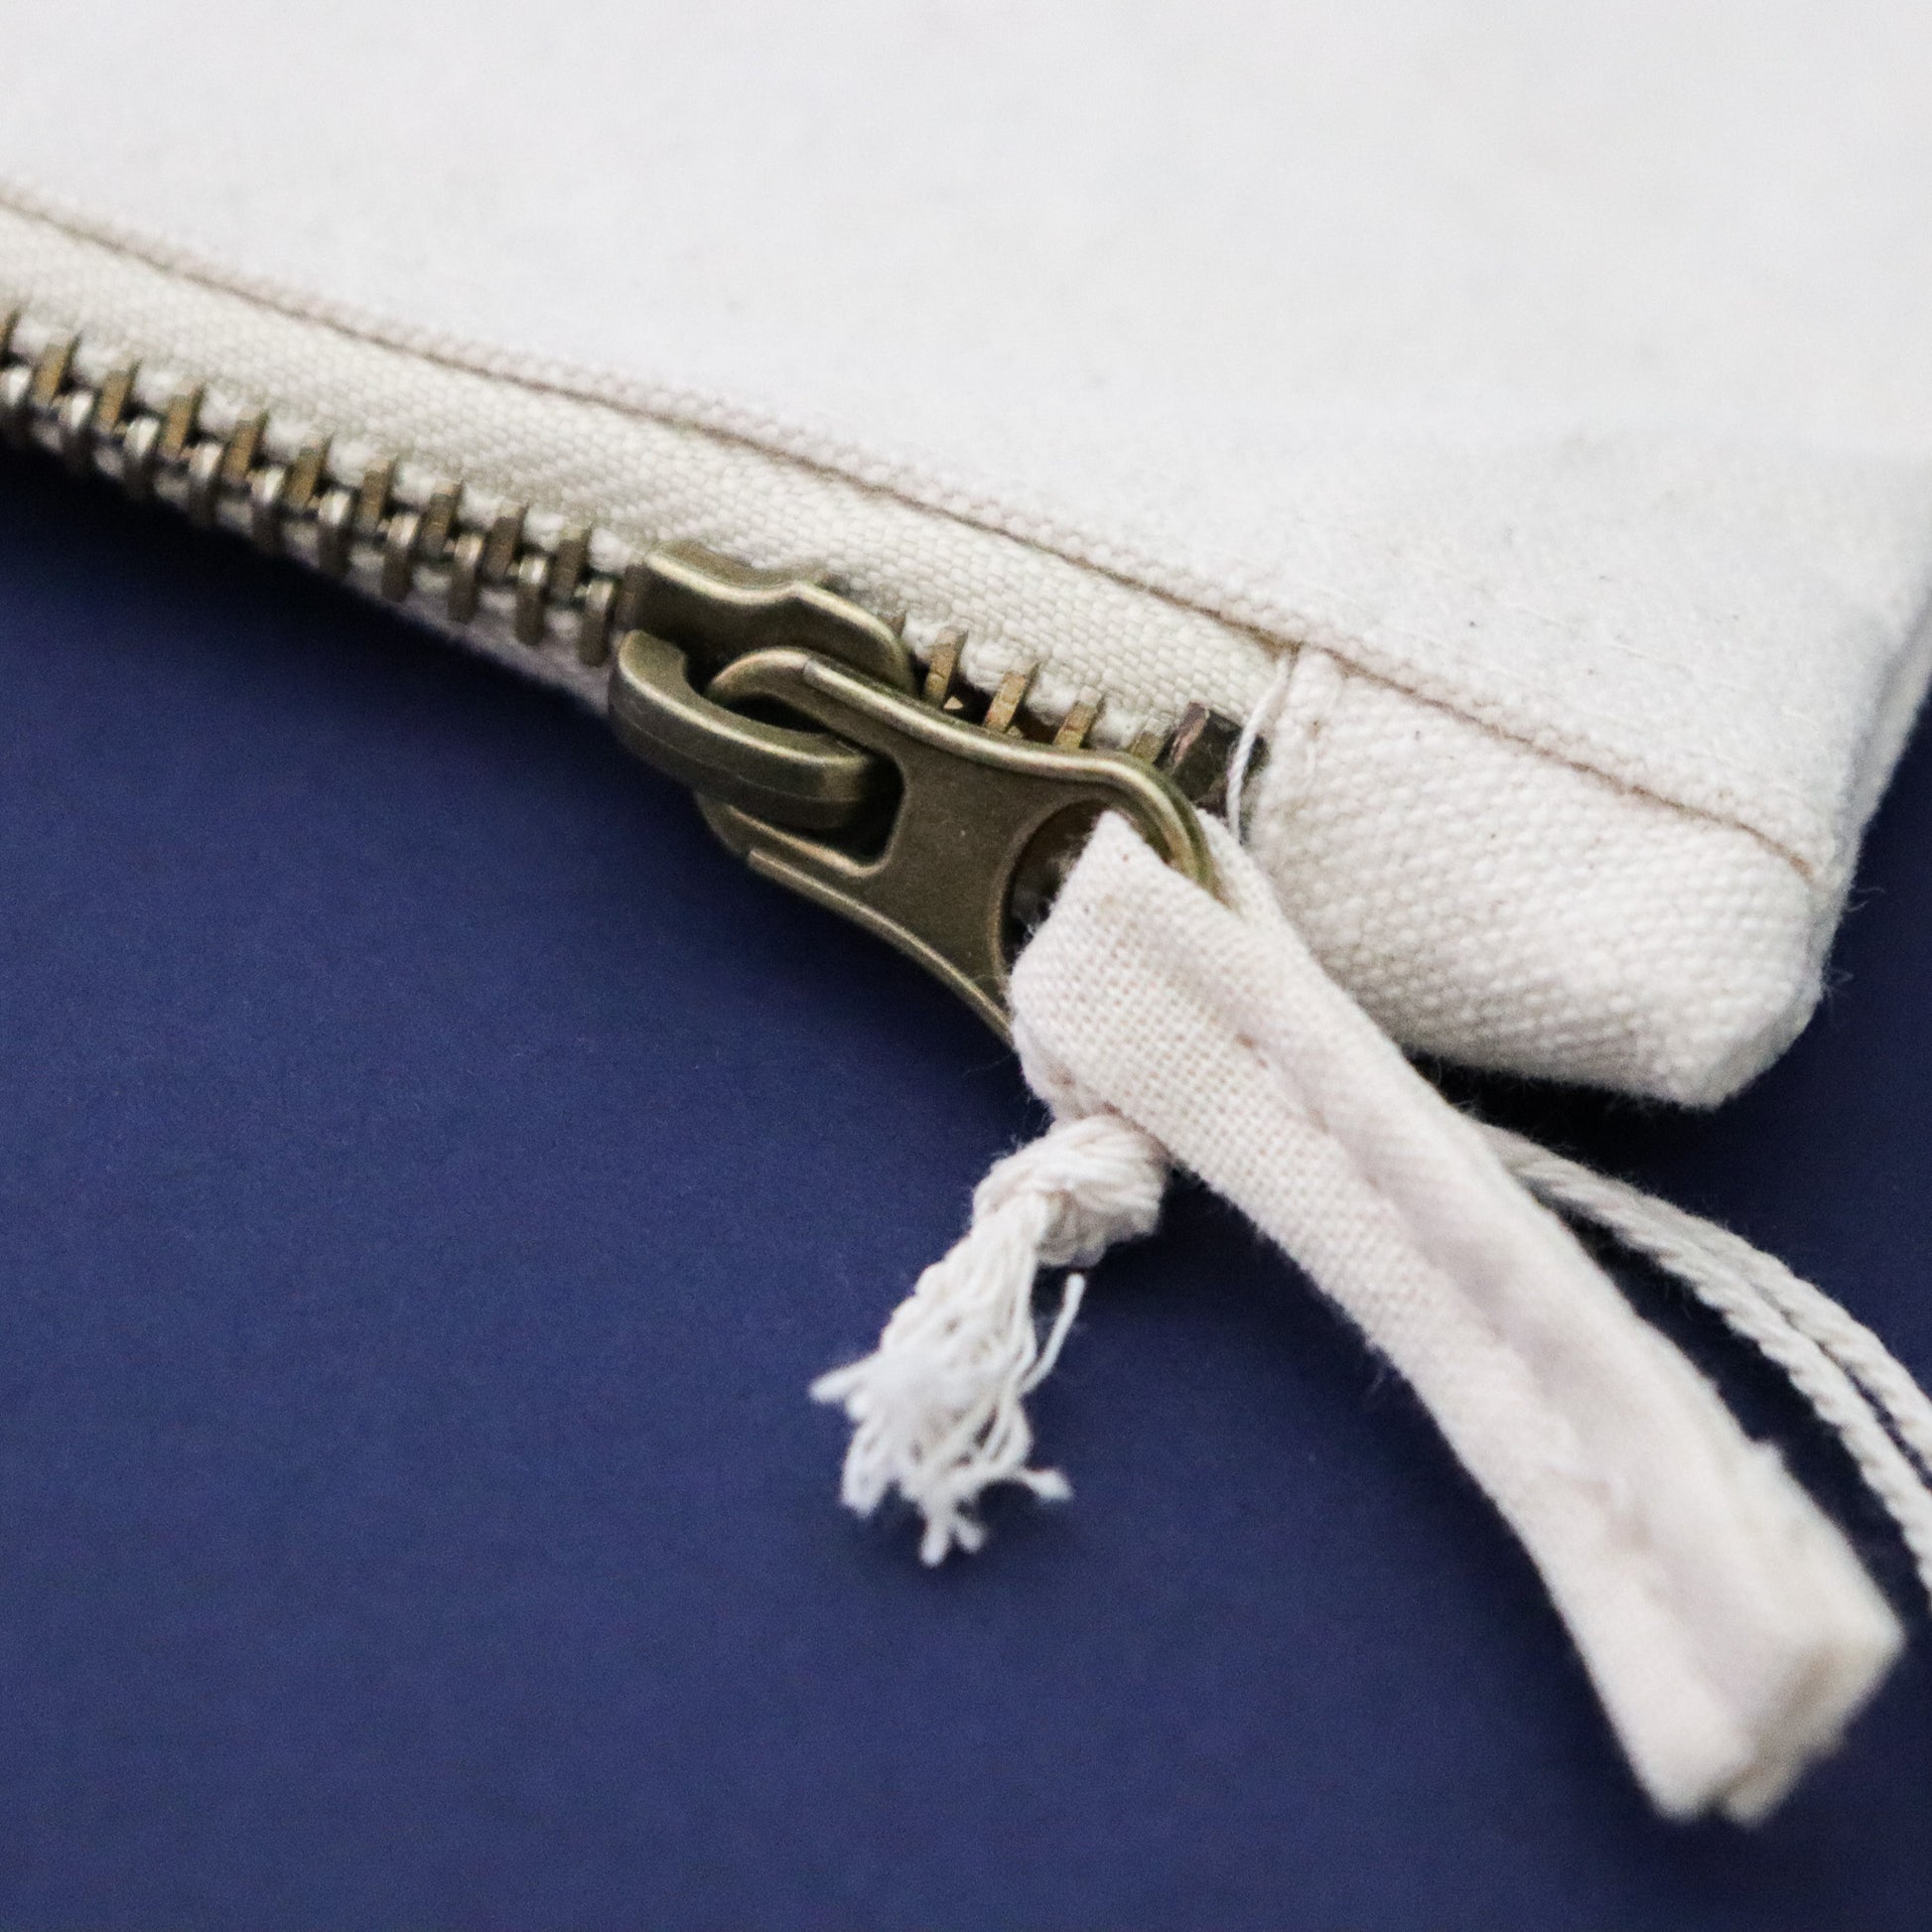 Detail of the zipper of the TXT Temptation pouch